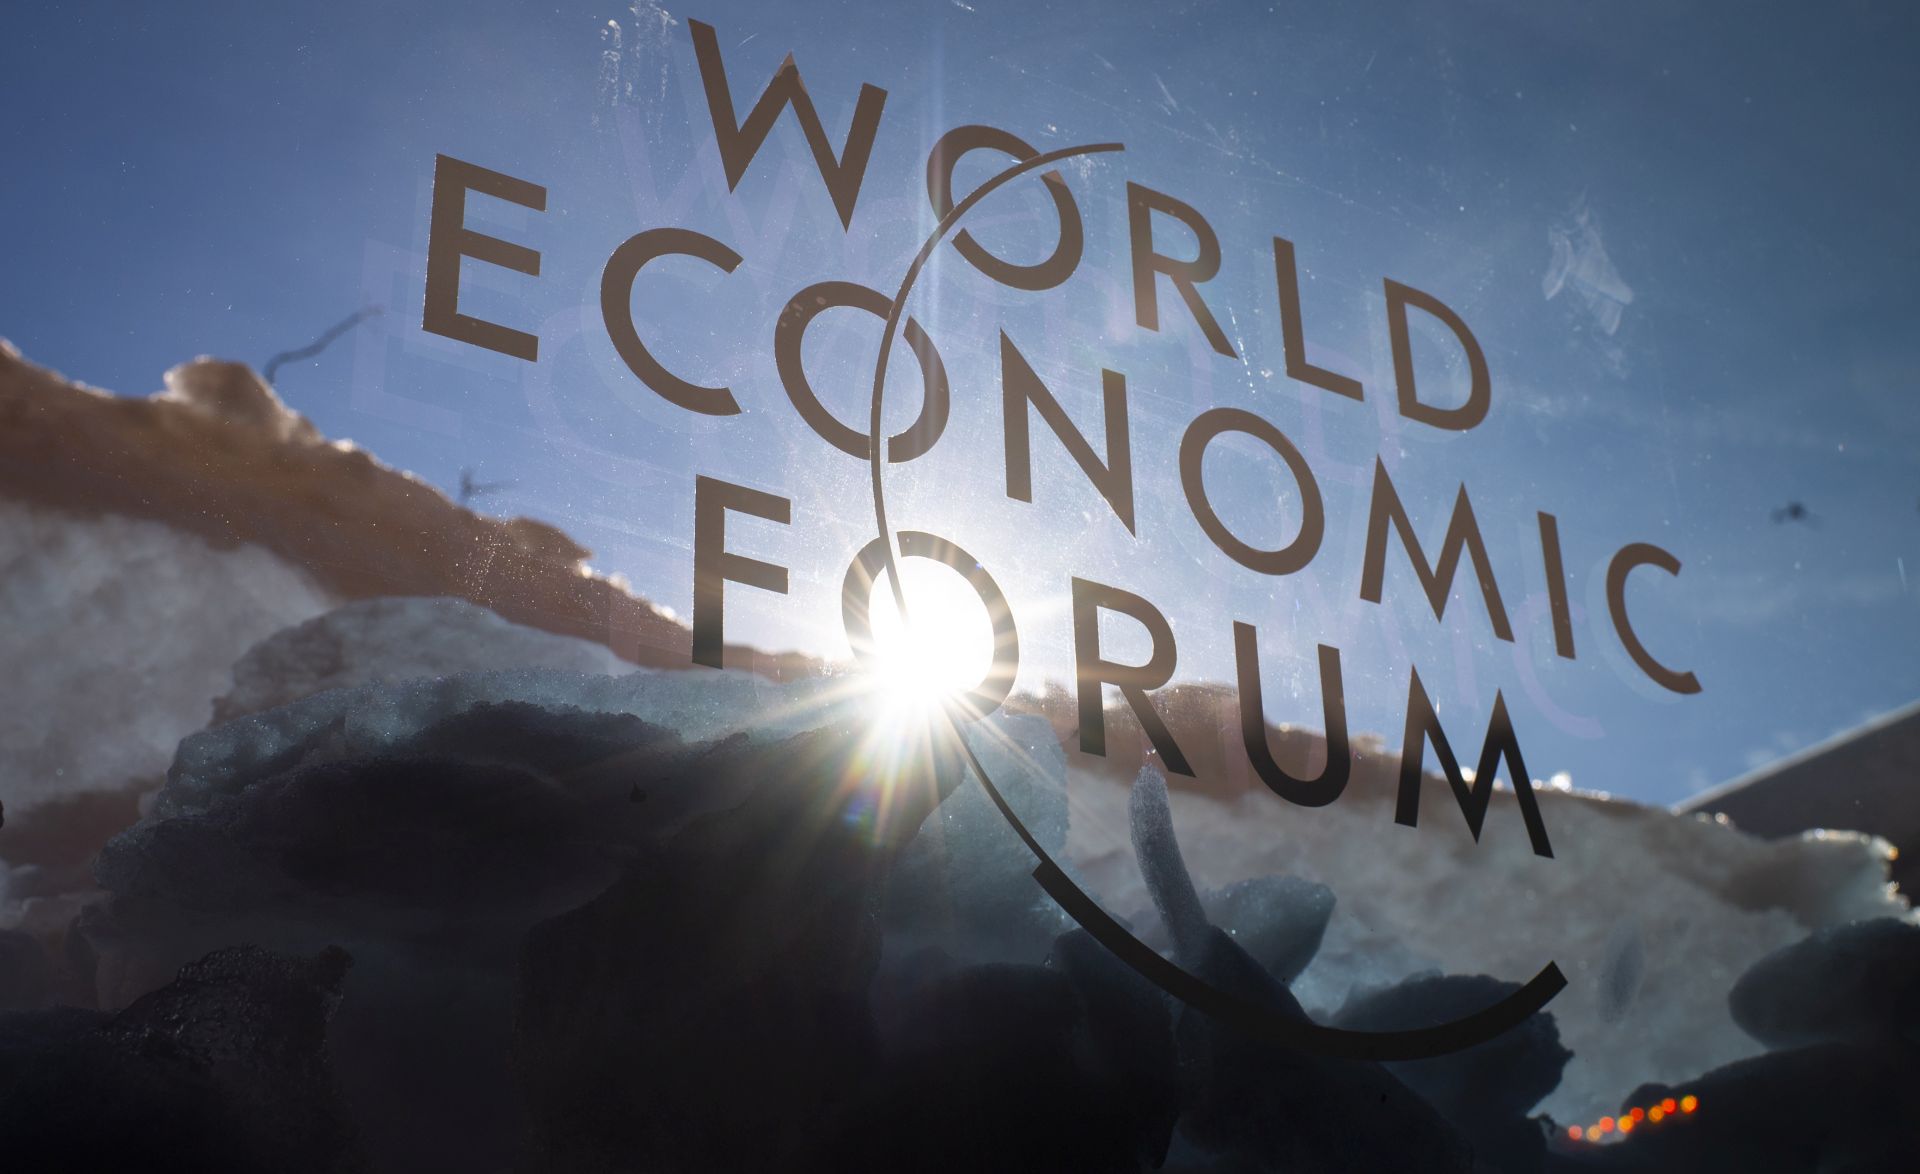 epa07311498 The sun shines through the logo of the WEF at the 49th annual meeting of the World Economic Forum, WEF, in Davos, Switzerland, 23 January 2019. The meeting brings together entrepreneurs, scientists, corporate and political leaders in Davos under the topic 'Globalization 4.0' from 22 - 25 January 2019.  EPA/GIAN EHRENZELLER